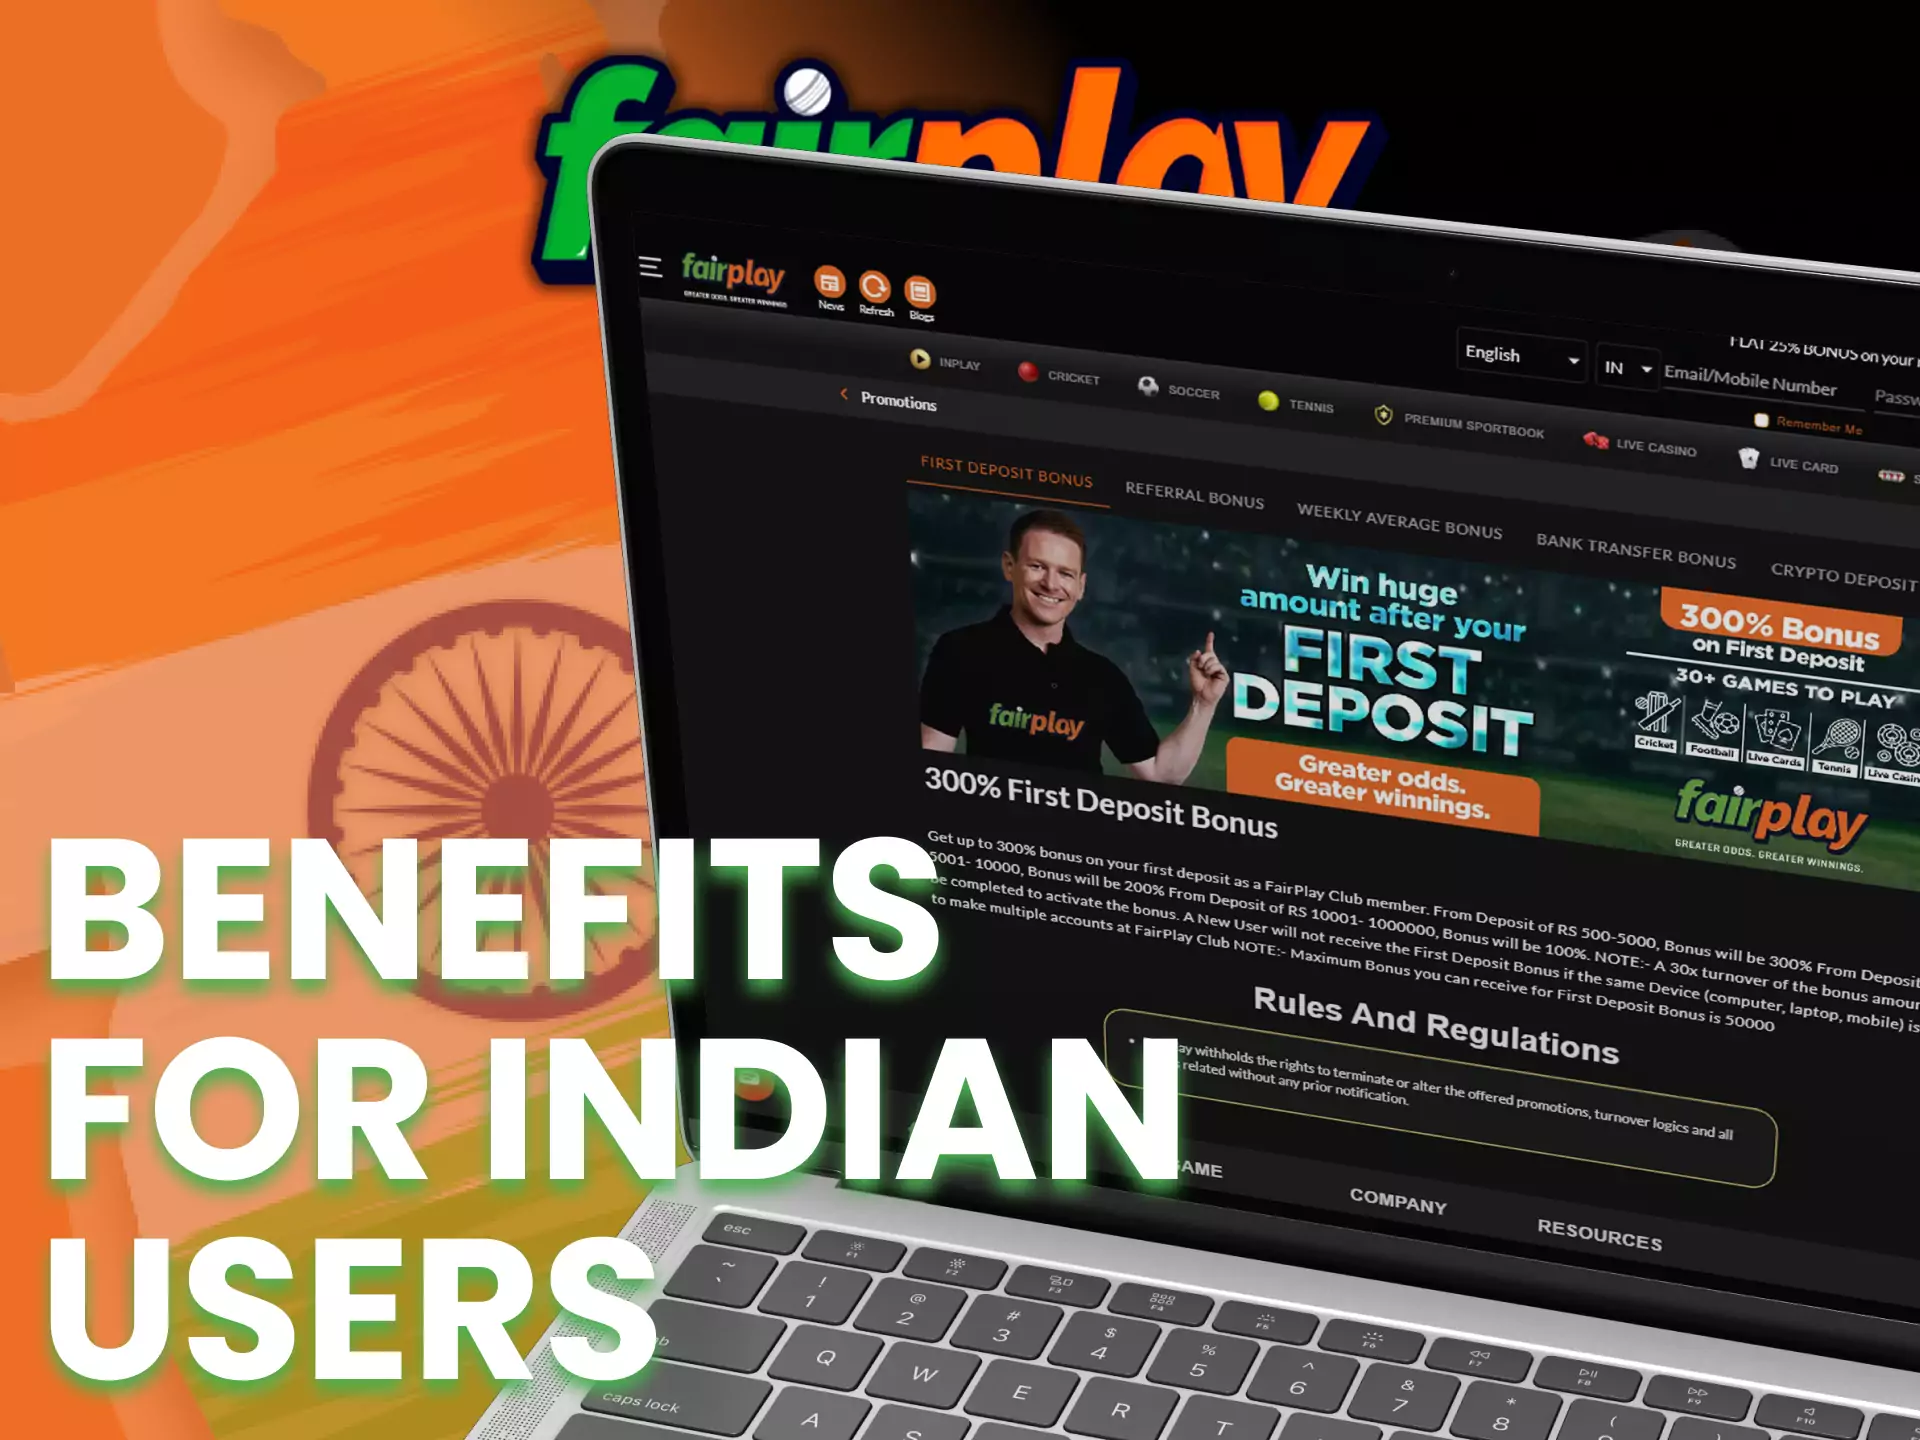 Fairplay offers its Indian users many benefits and bonuses.